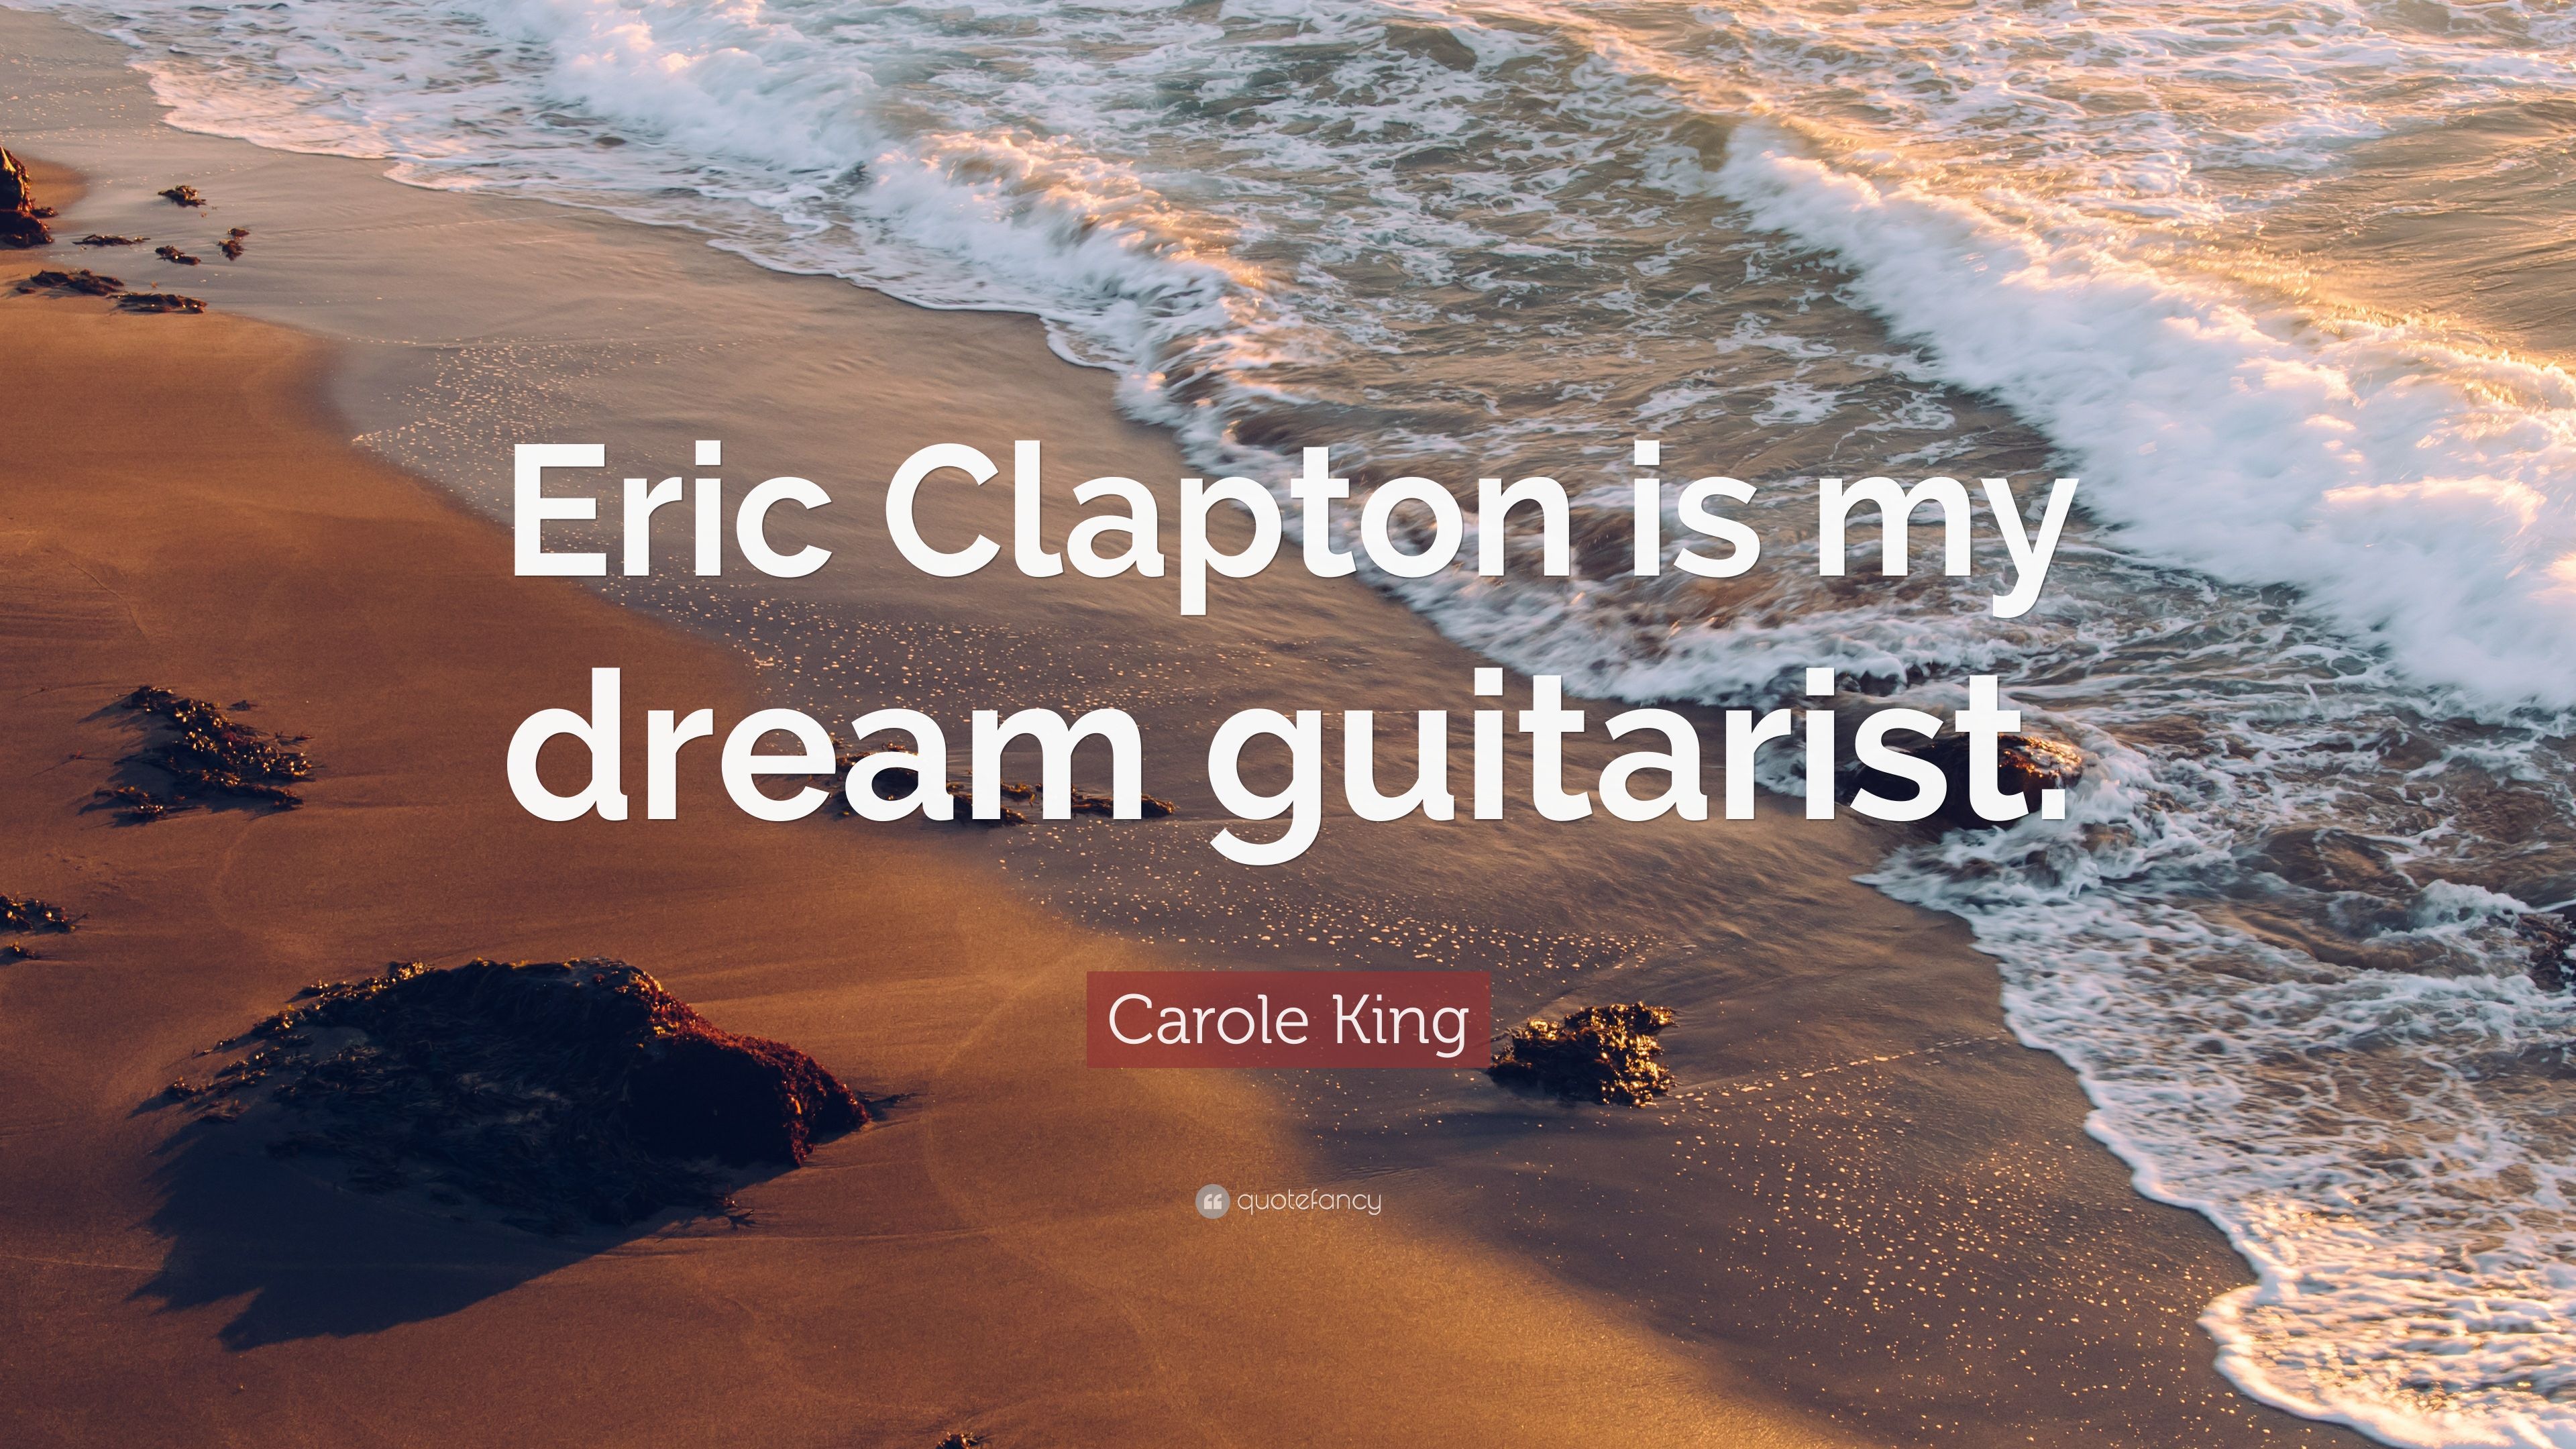 Carole King Quote: “Eric Clapton is my dream guitarist.” 7